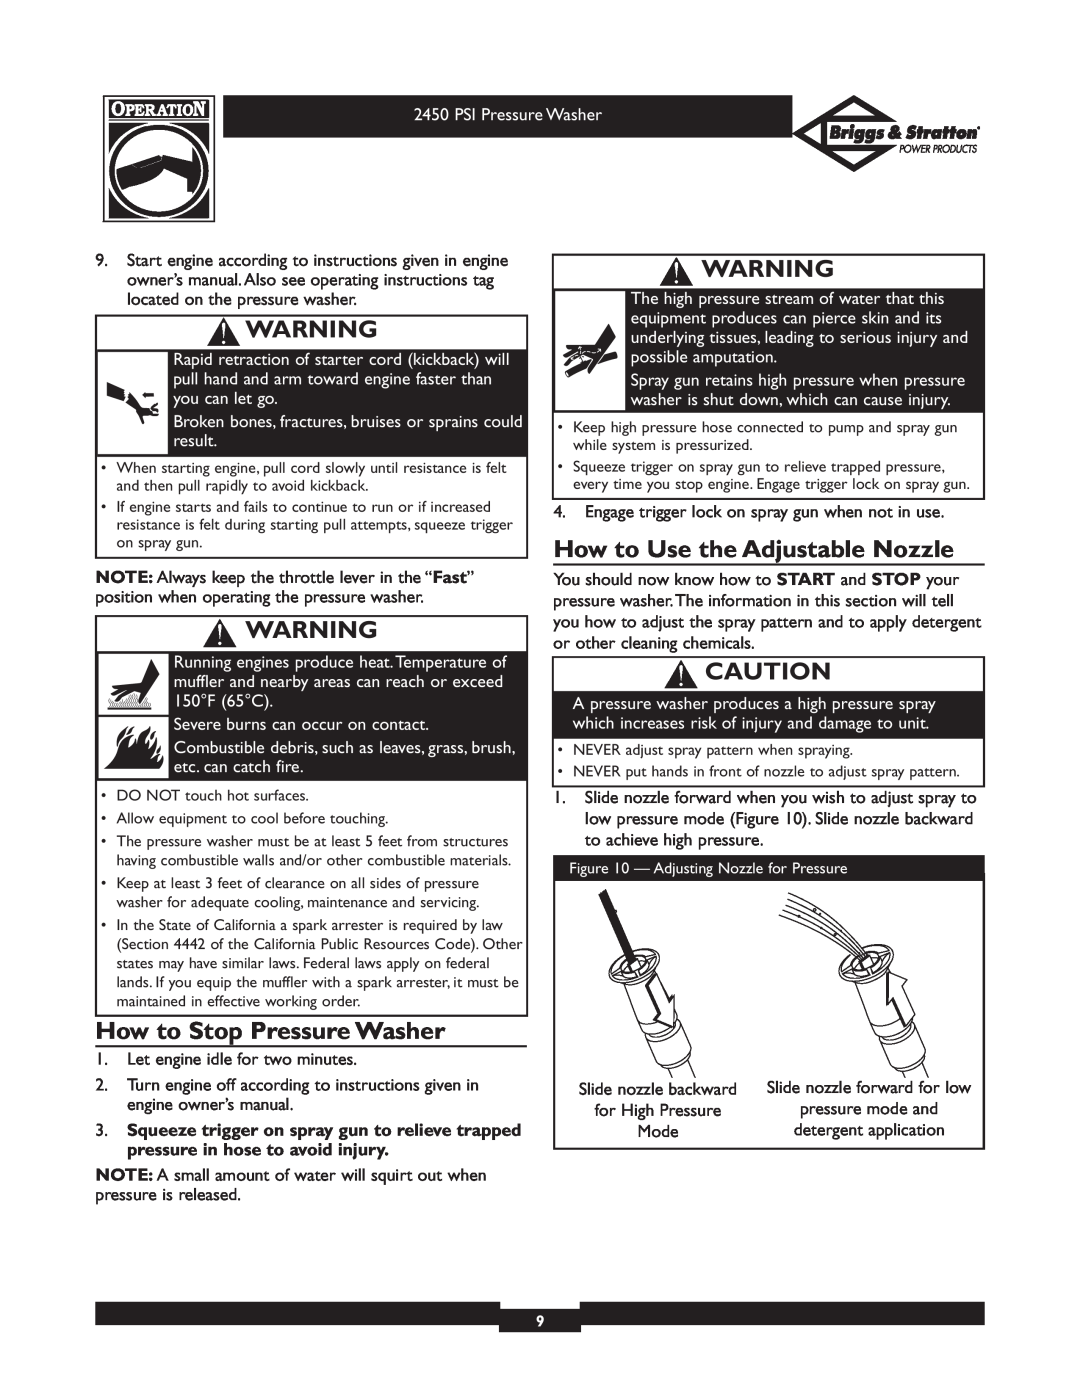 Briggs & Stratton 020219 owner manual How to Stop Pressure Washer, How to Use the Adjustable Nozzle 